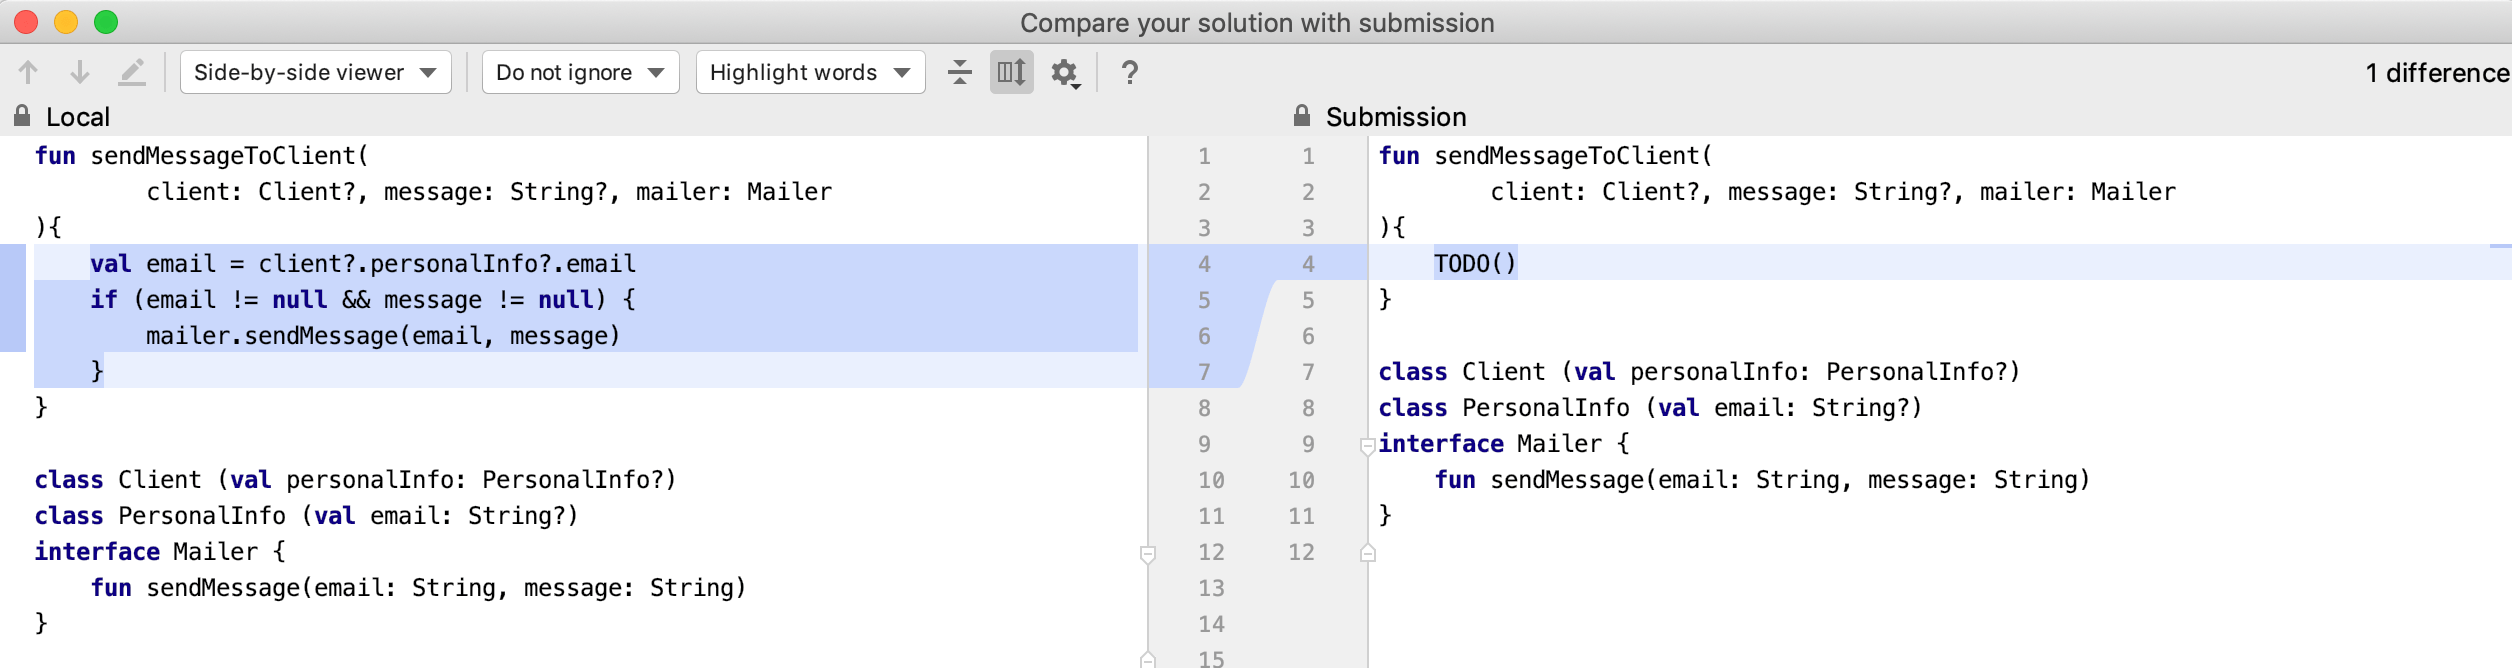 edu submissions diff kotlin koans png